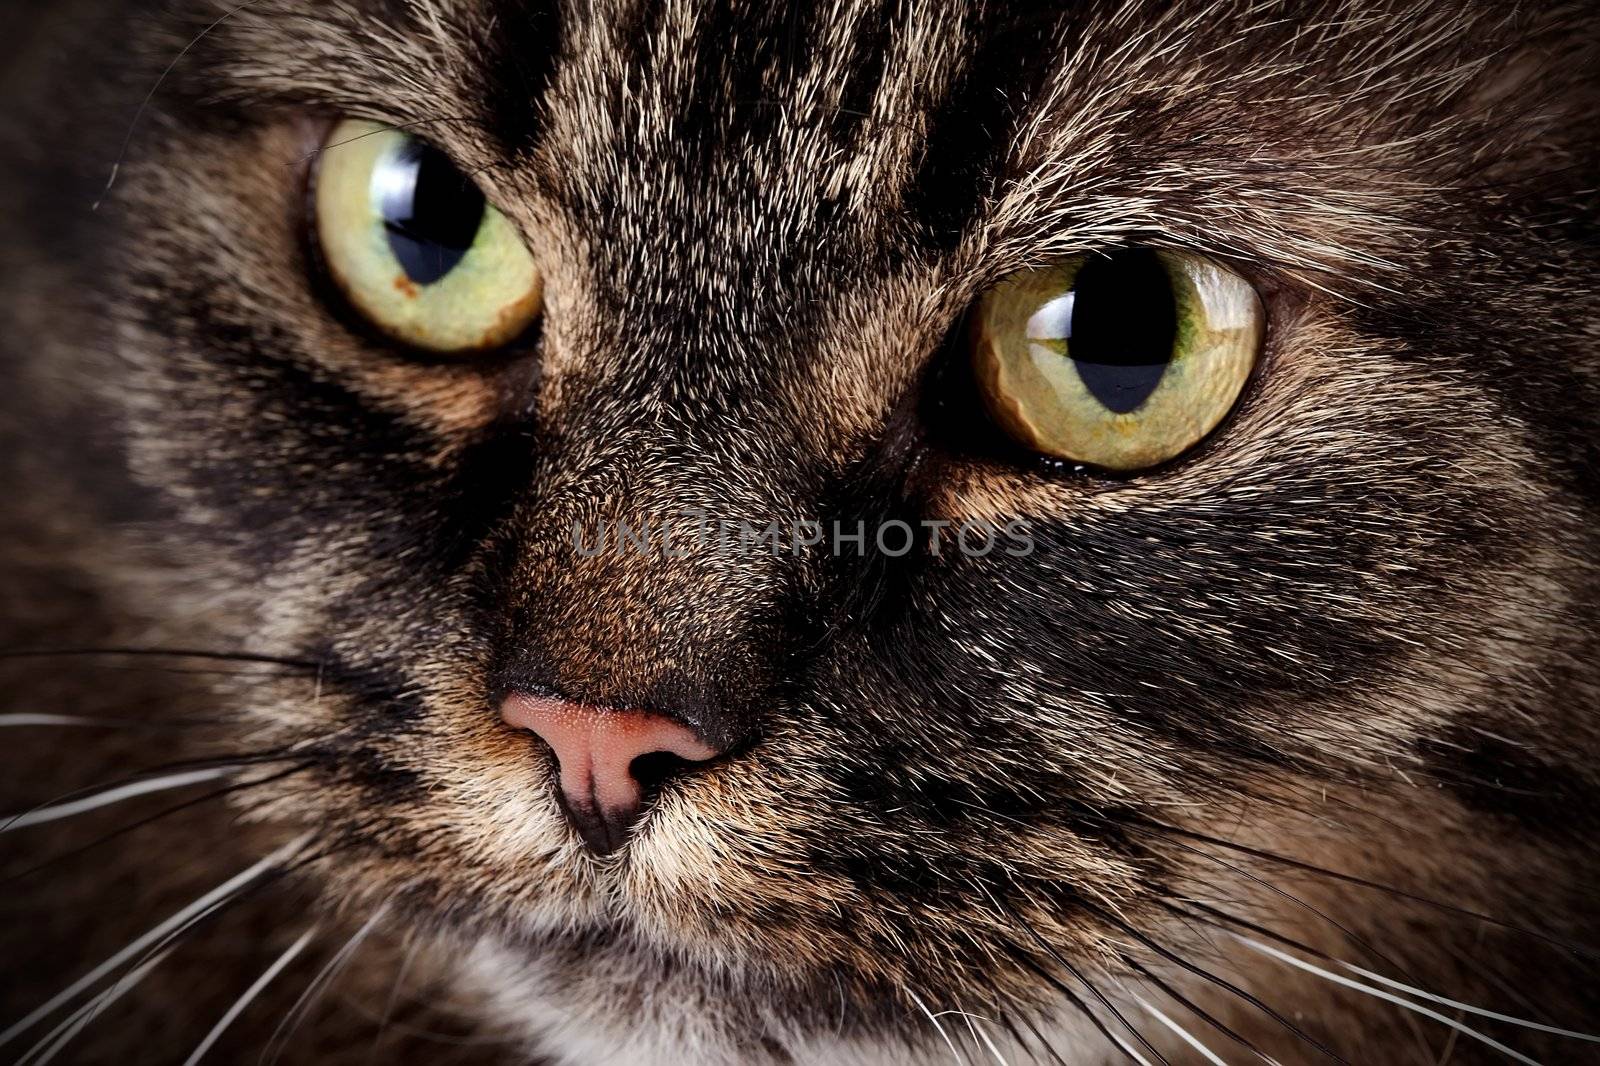 Muzzle of a cat with beautiful eyes